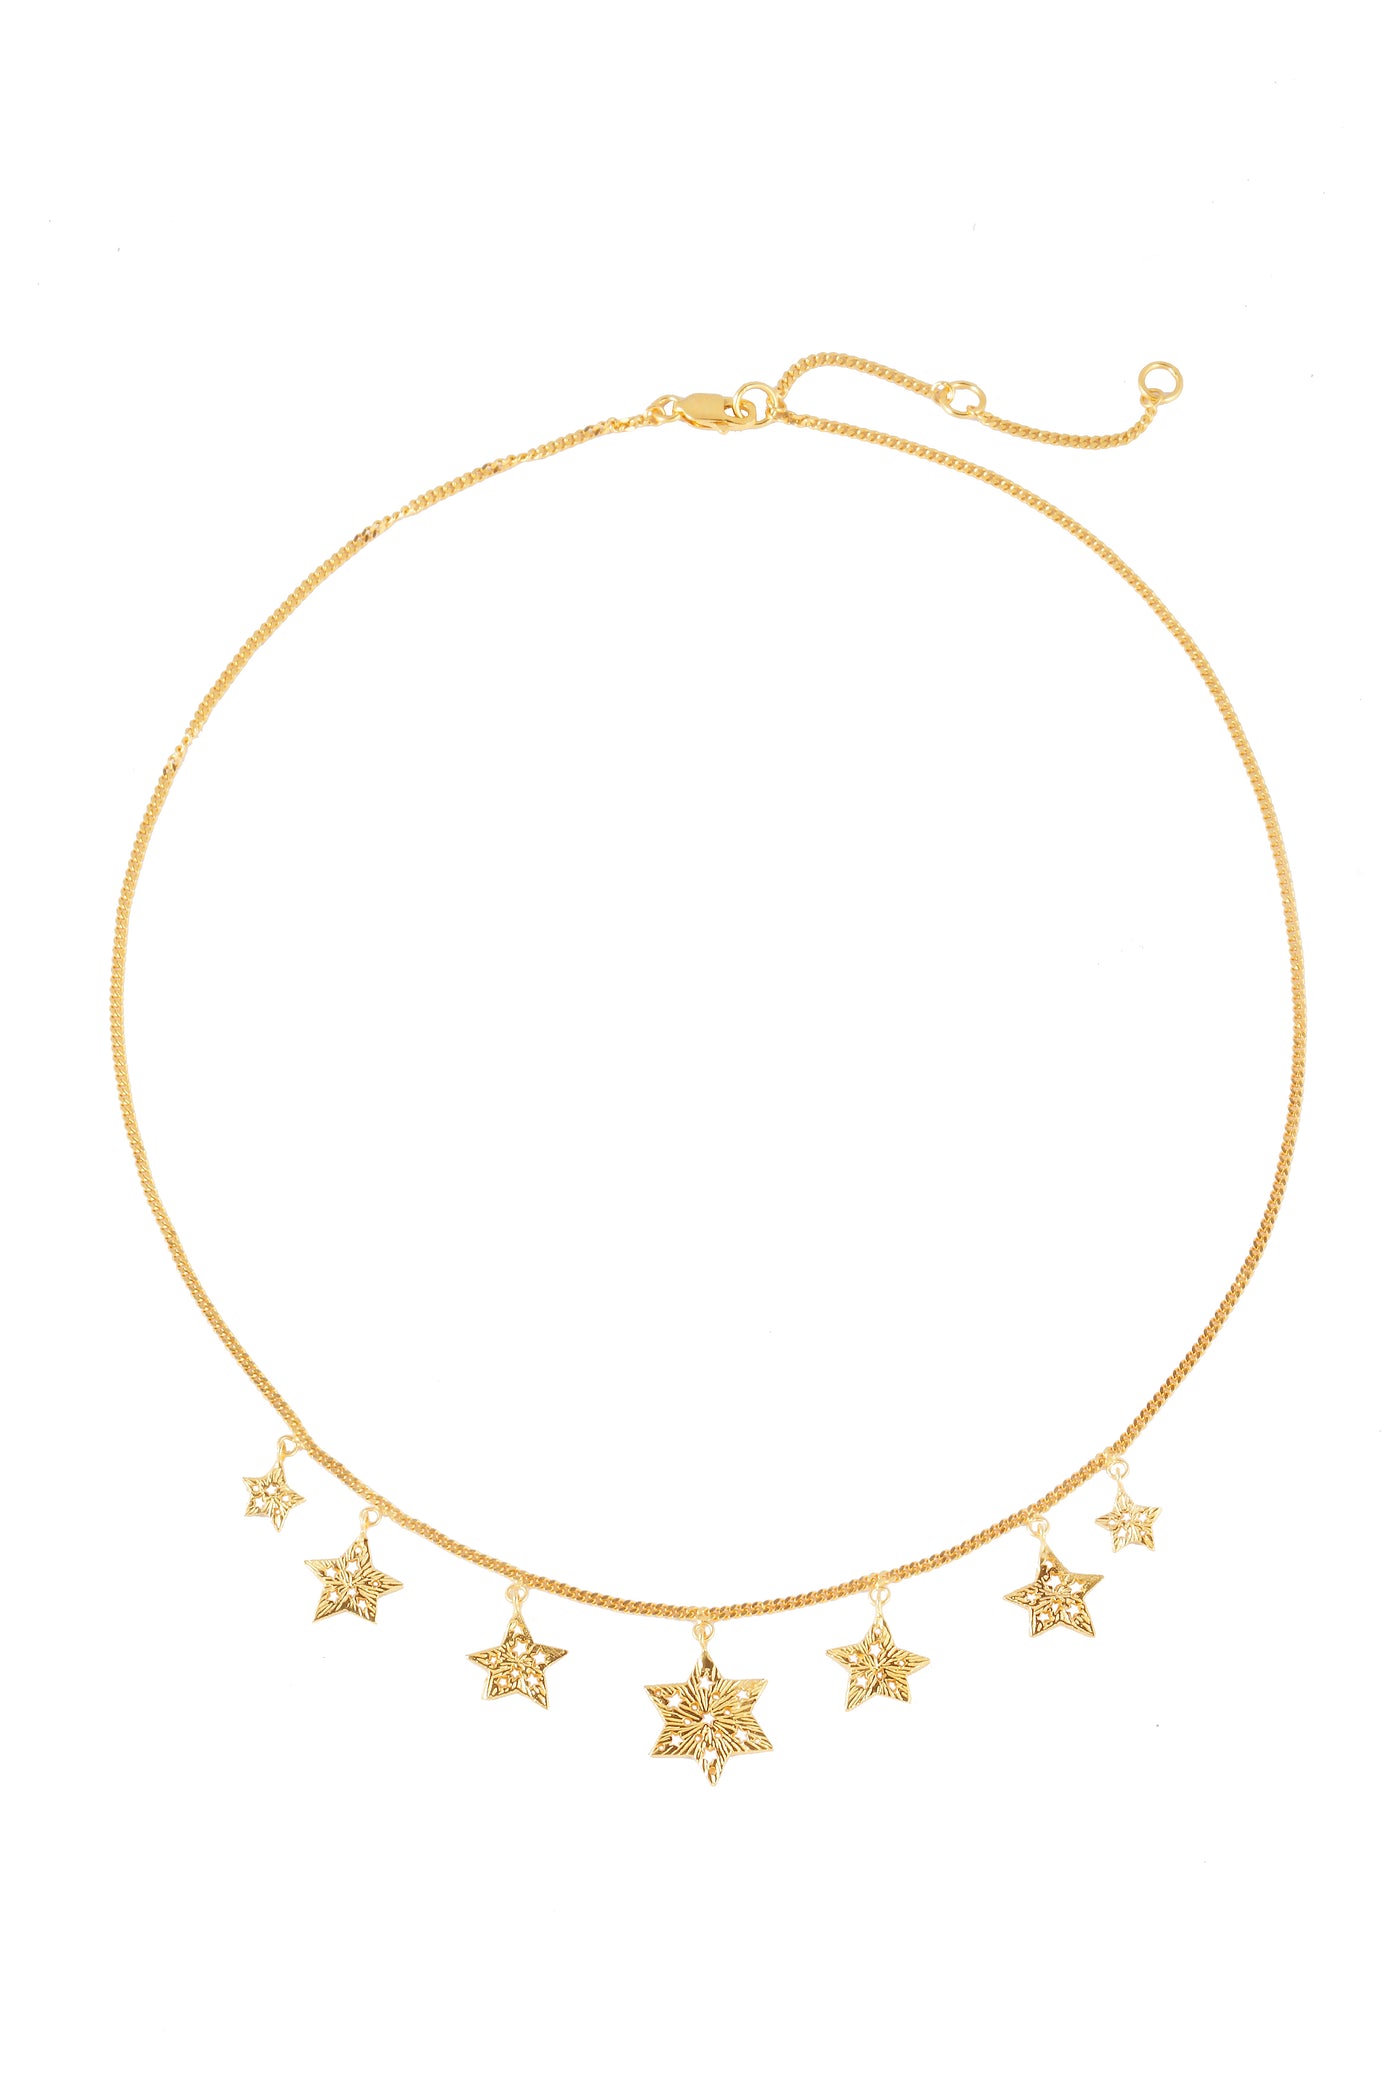 7 stars necklace. Silver, gold-plated